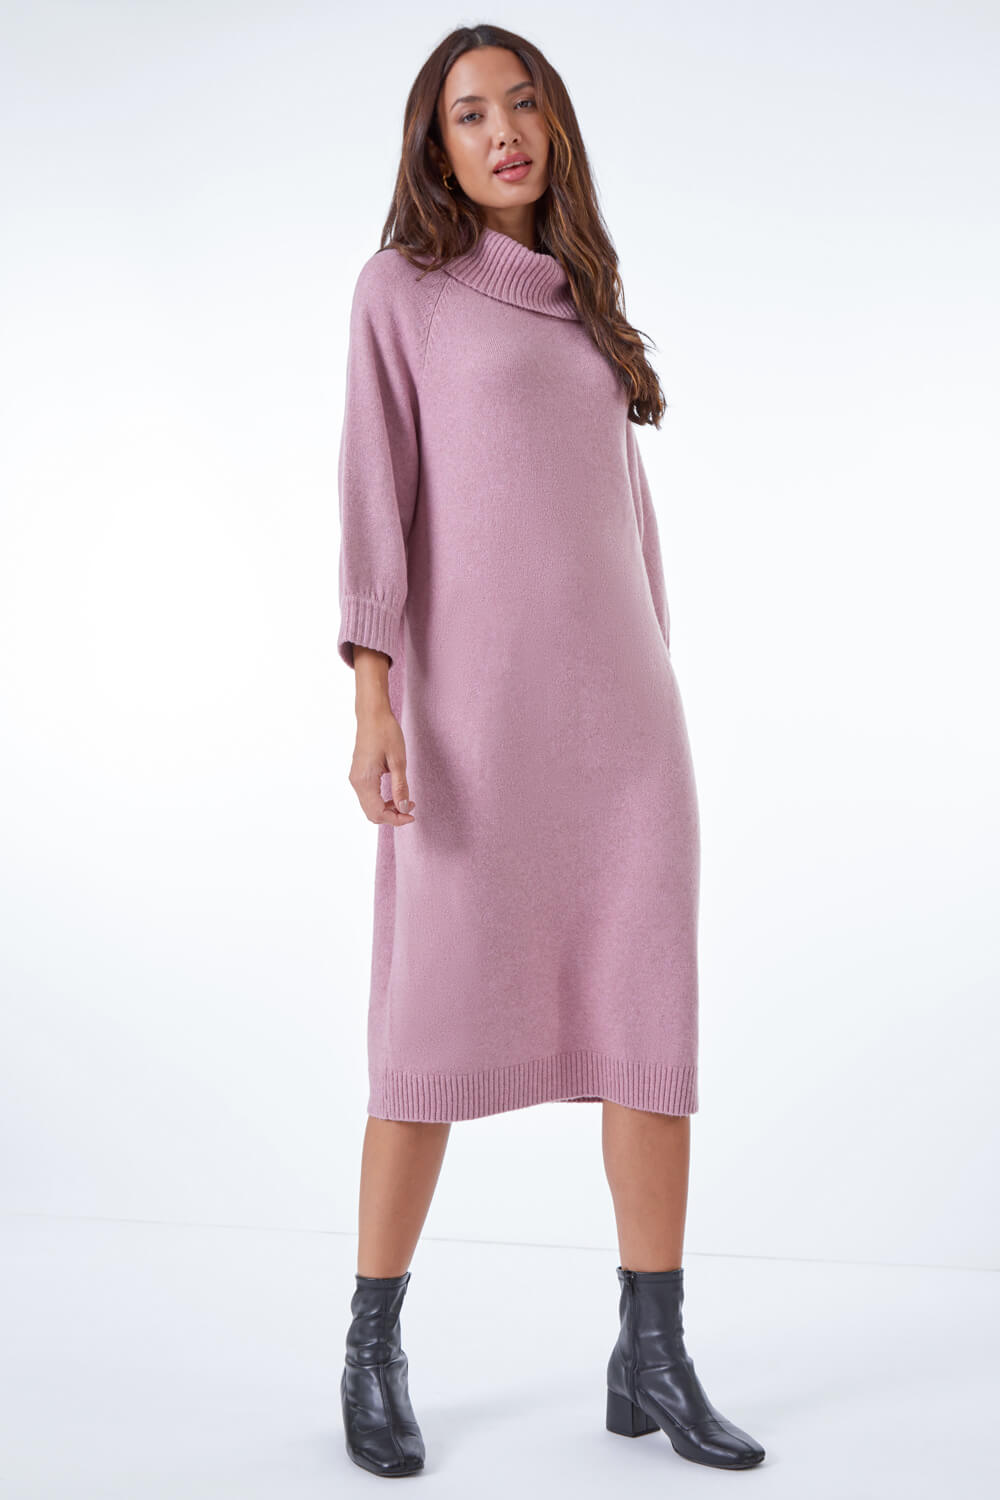 Light Pink Roll Neck Knitted Midi Dress, Image 2 of 5